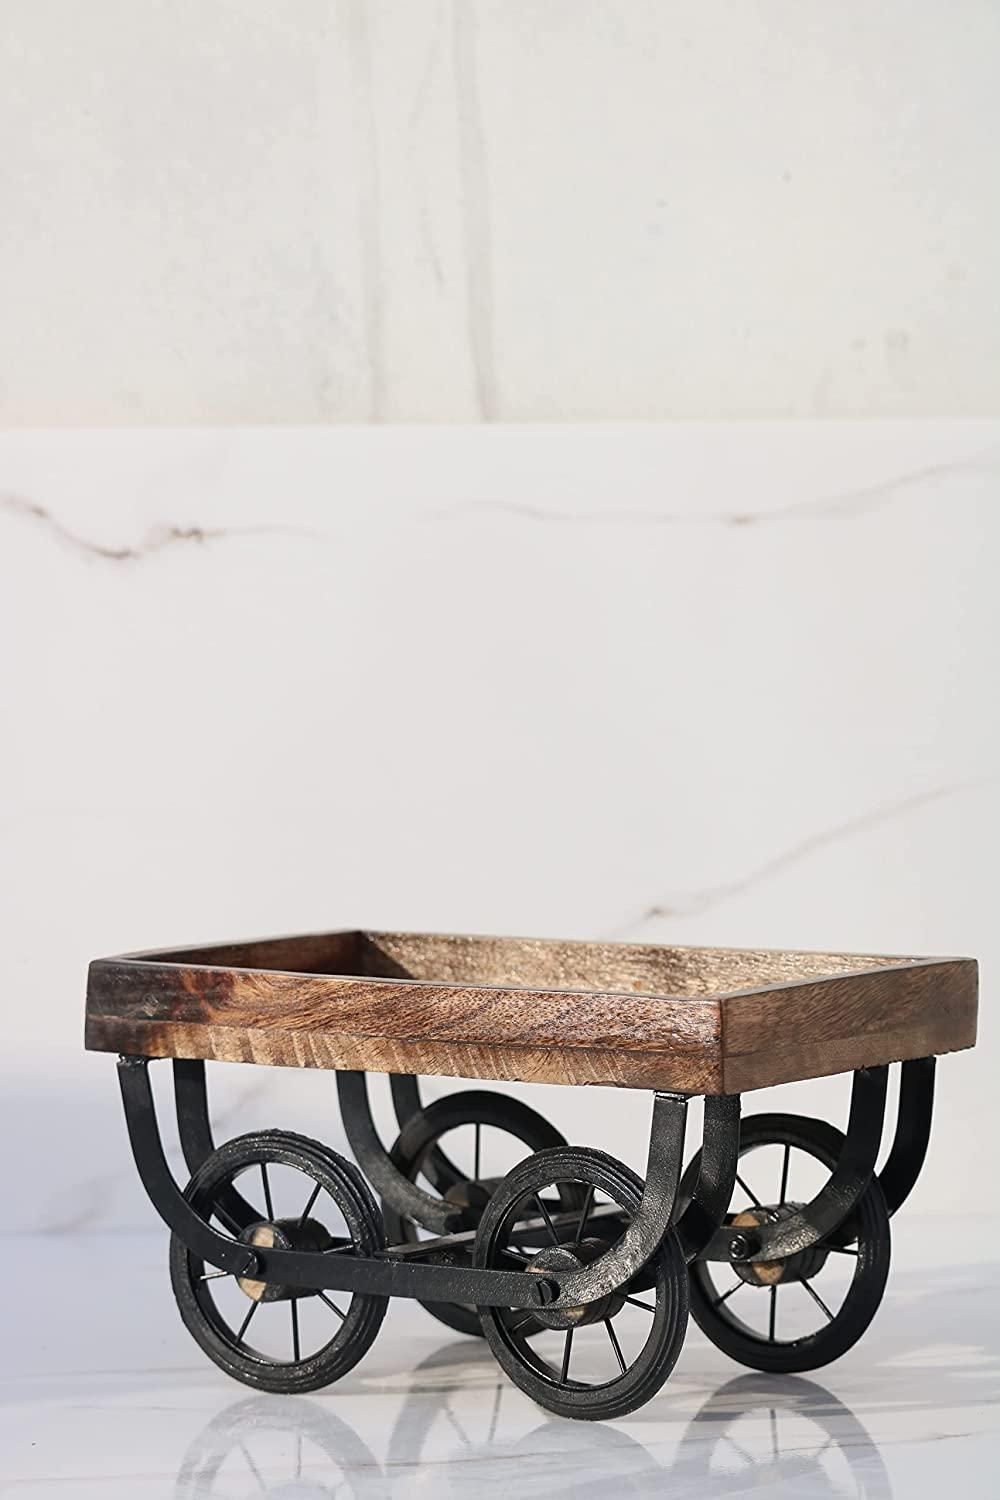 Wooden Handmade Redi thela with Moveable Wheels for Wine Bottle Holder 4